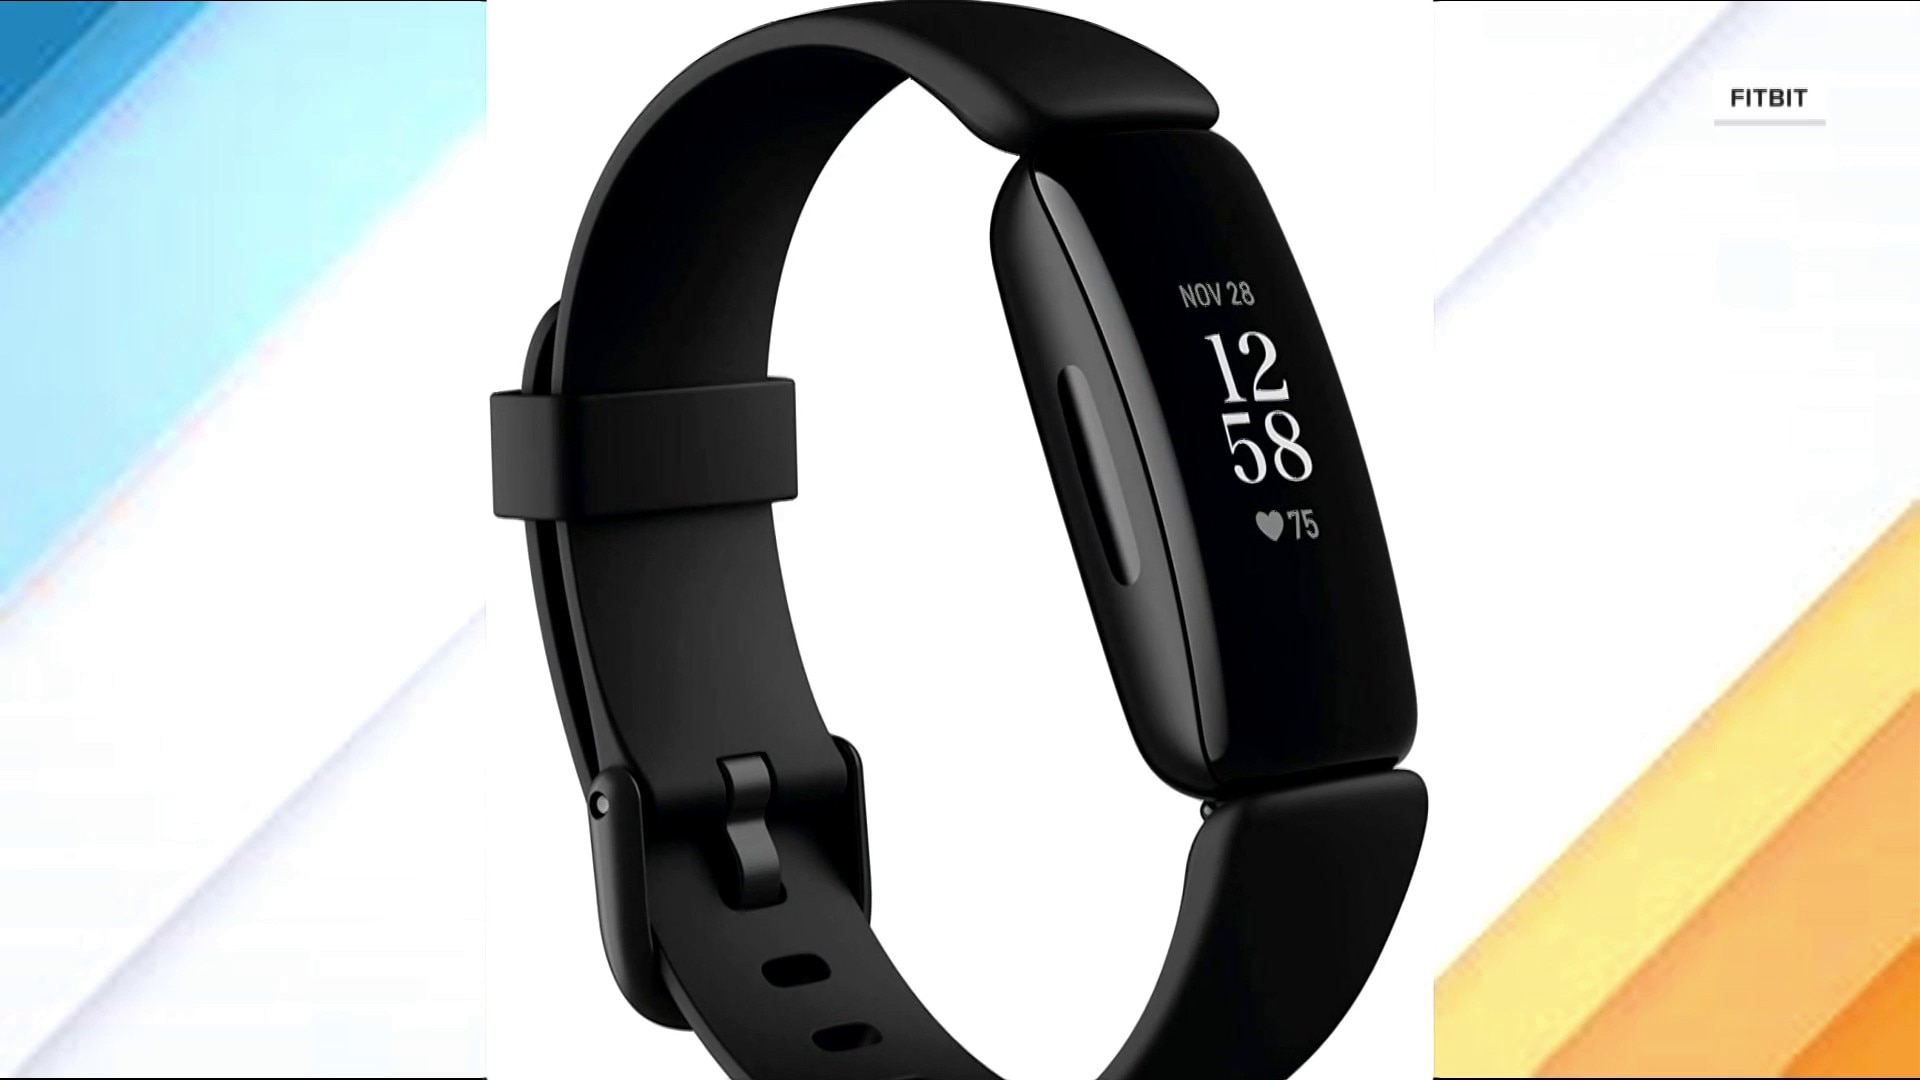 Watch TODAY Highlight Amazon Prime Day bestsellers Fitbit tracker